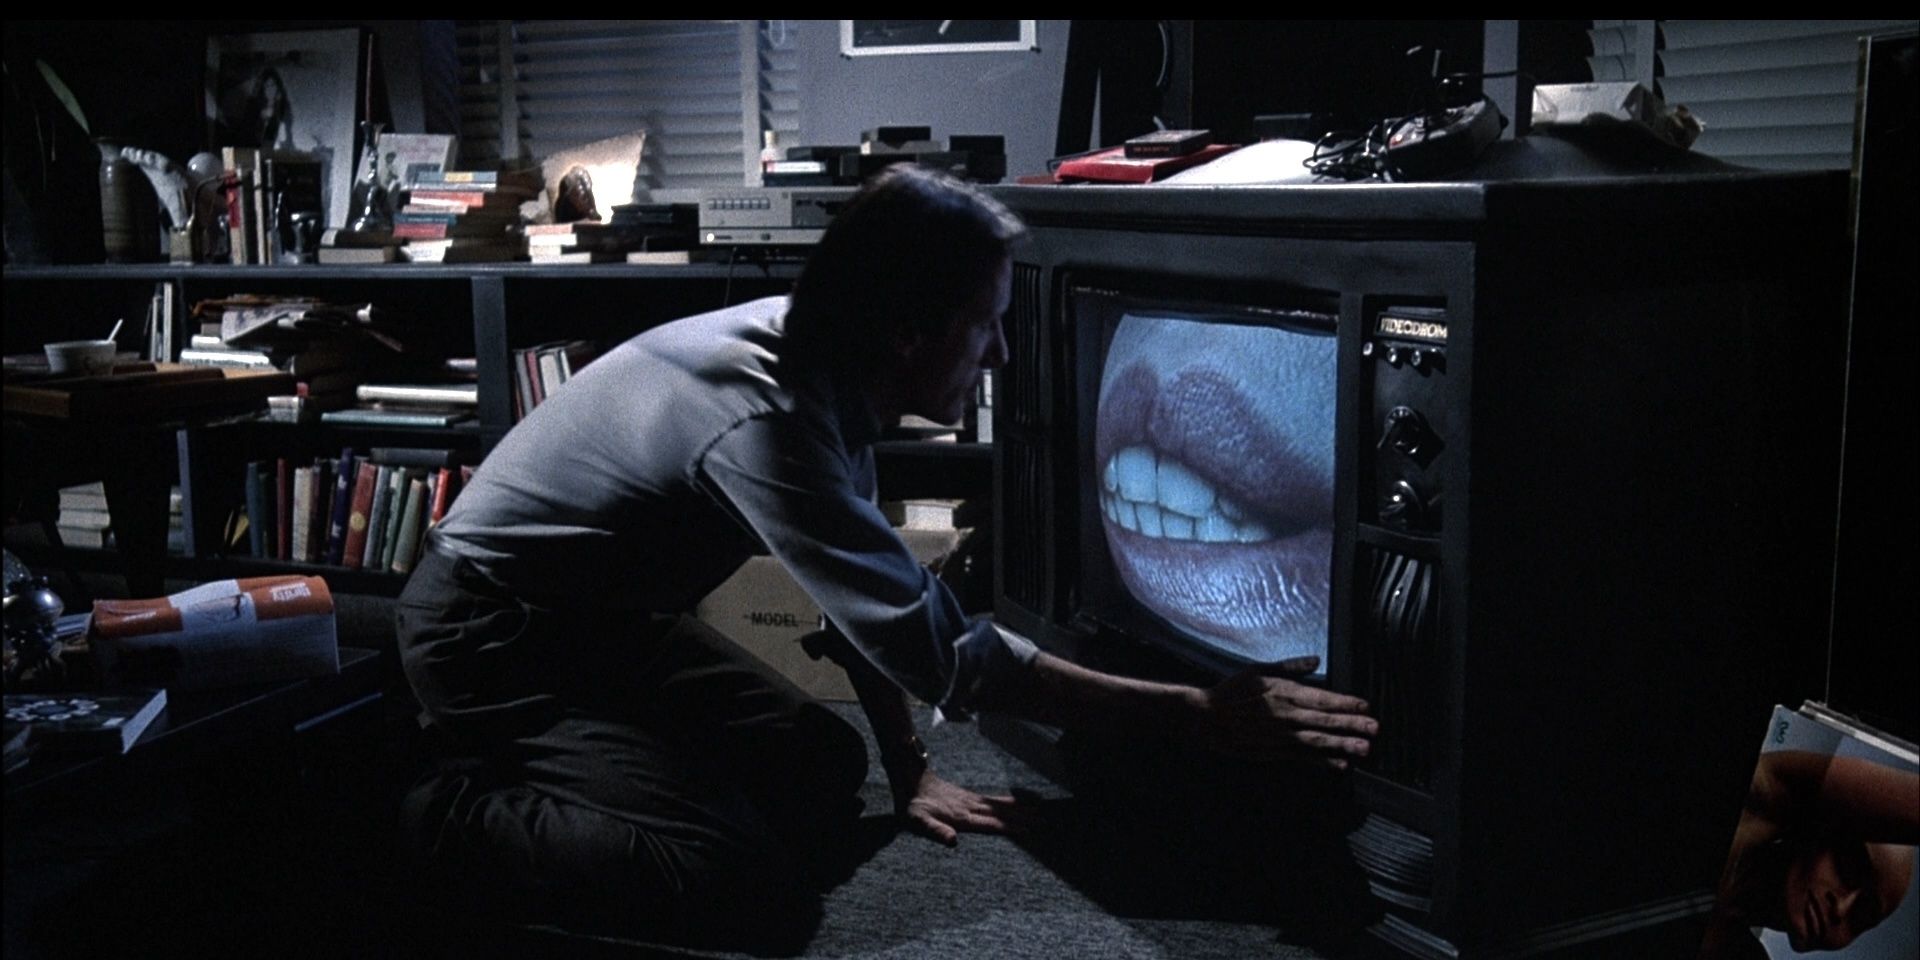 James Woods's character Max watches a video on the TV in Cronenberg's Videodrome